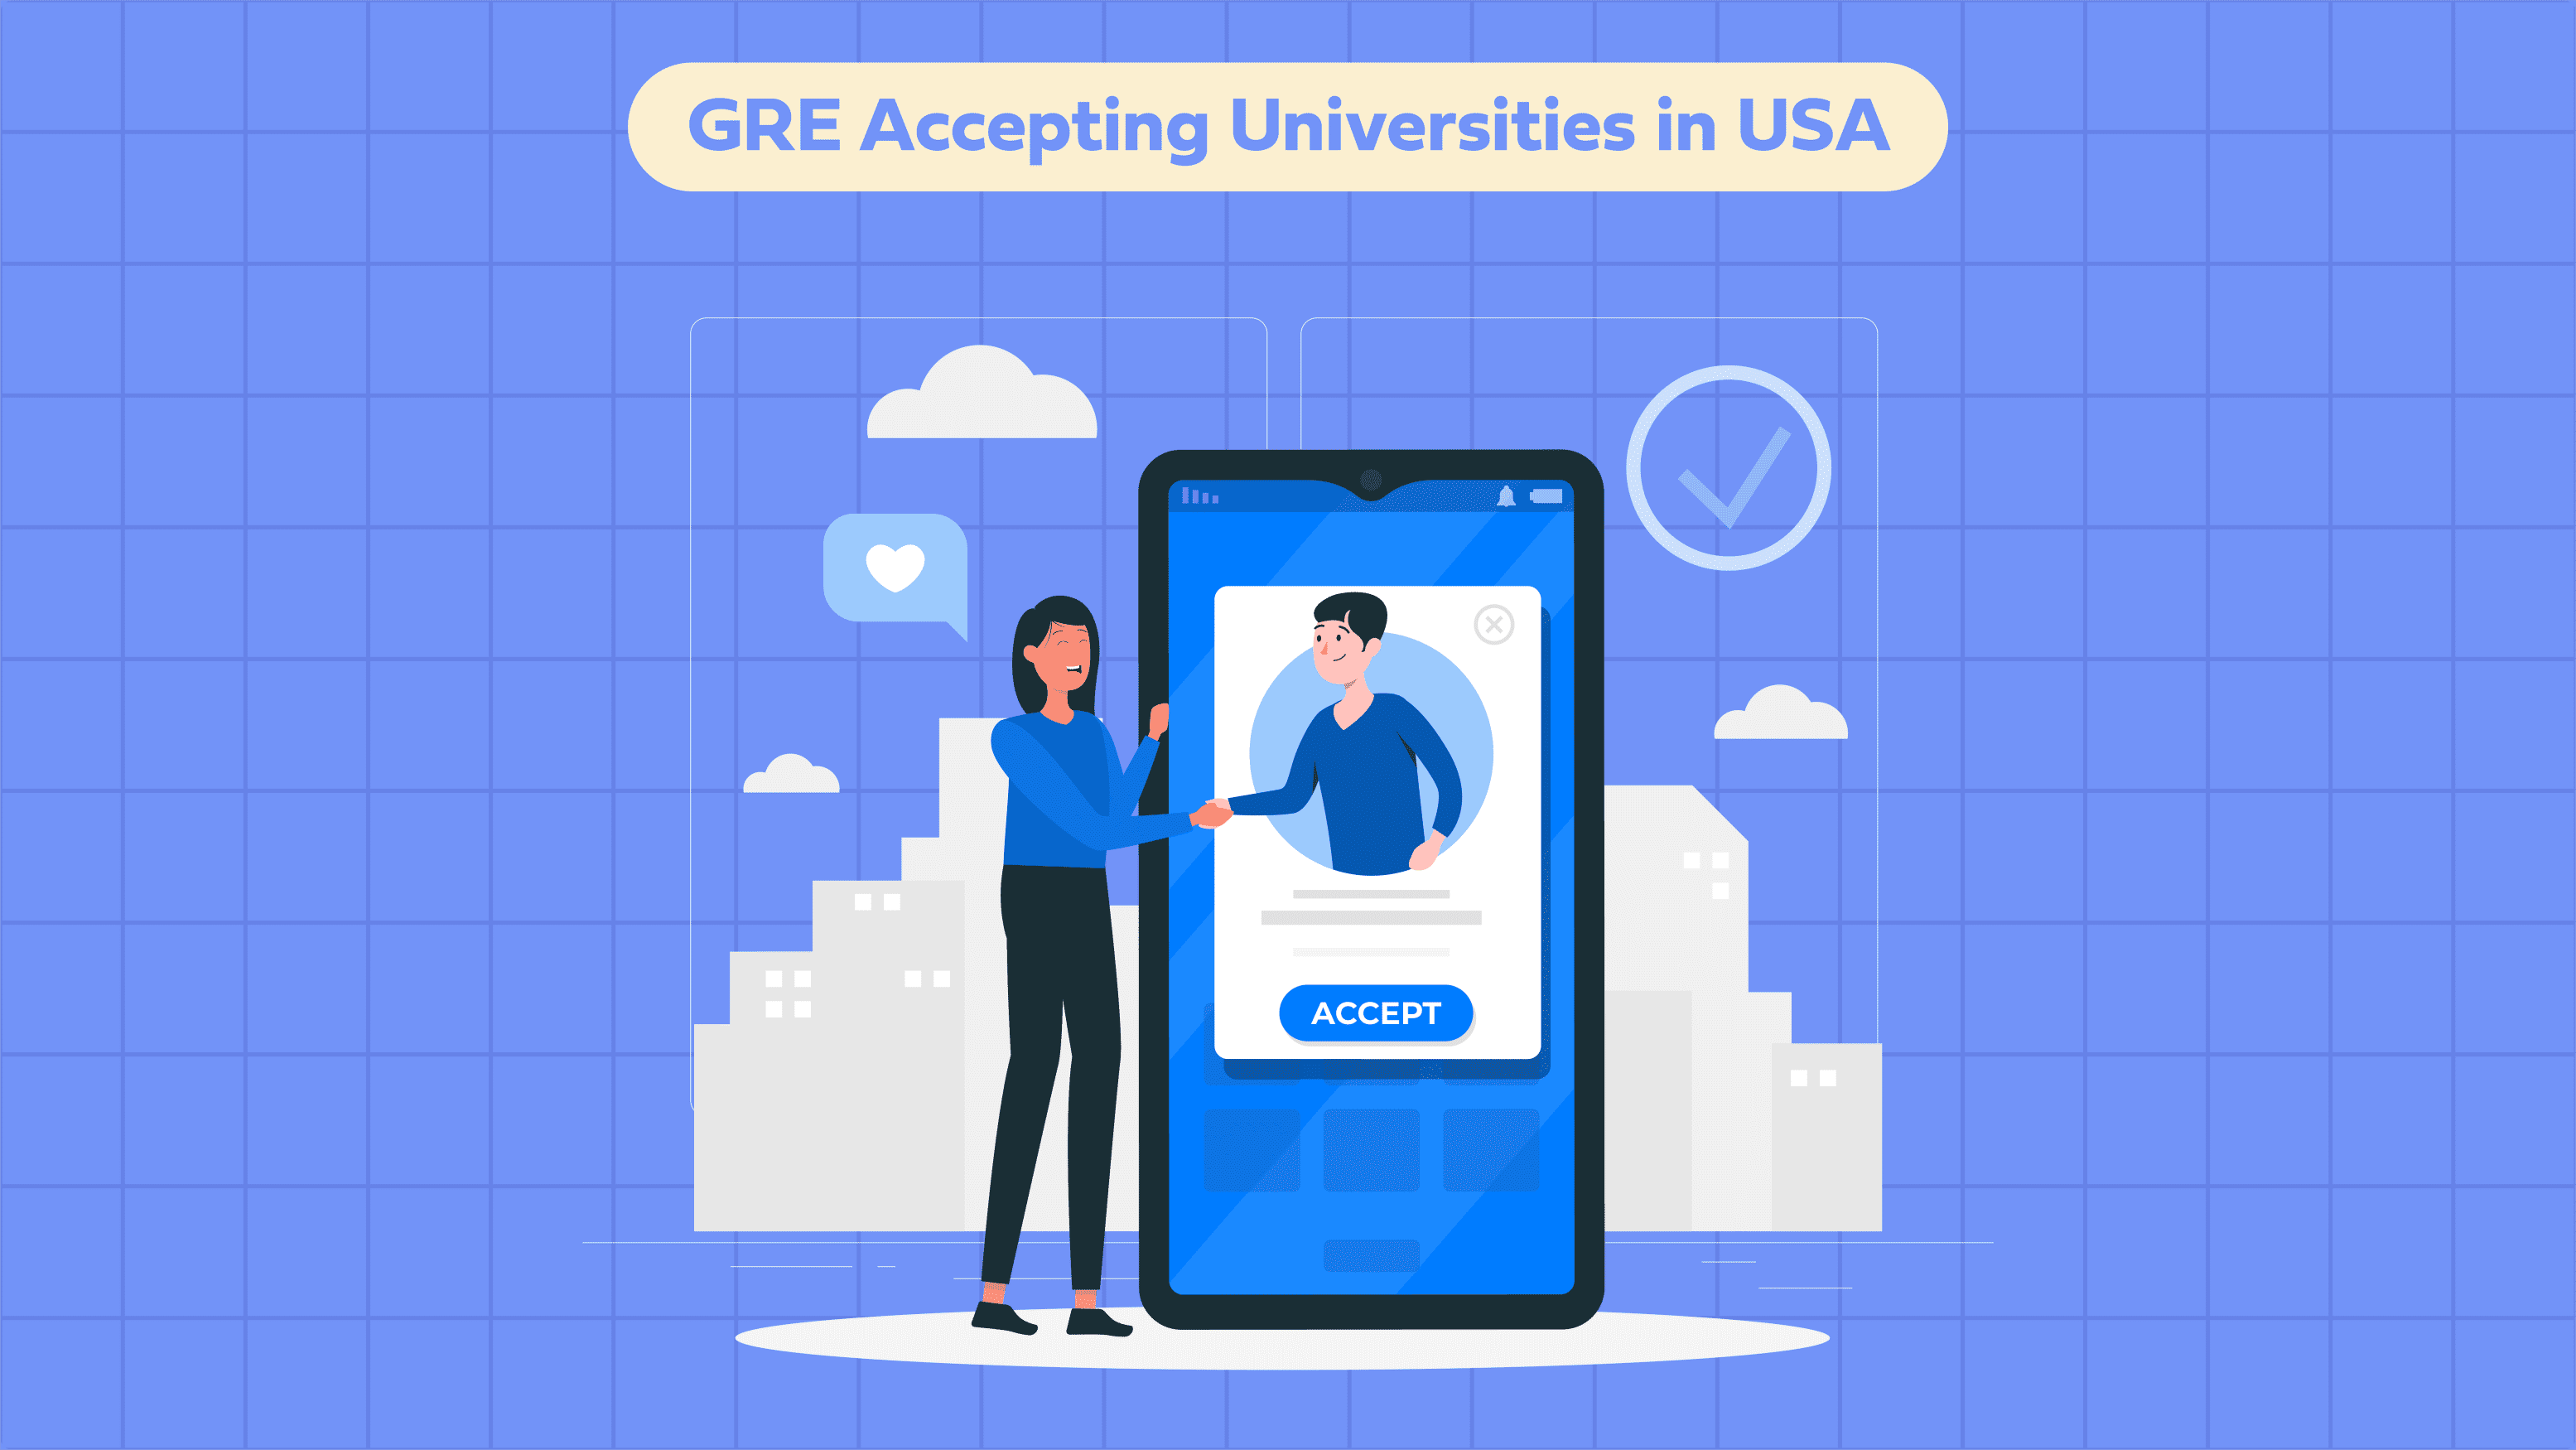 GRE Accepting Universities in the US